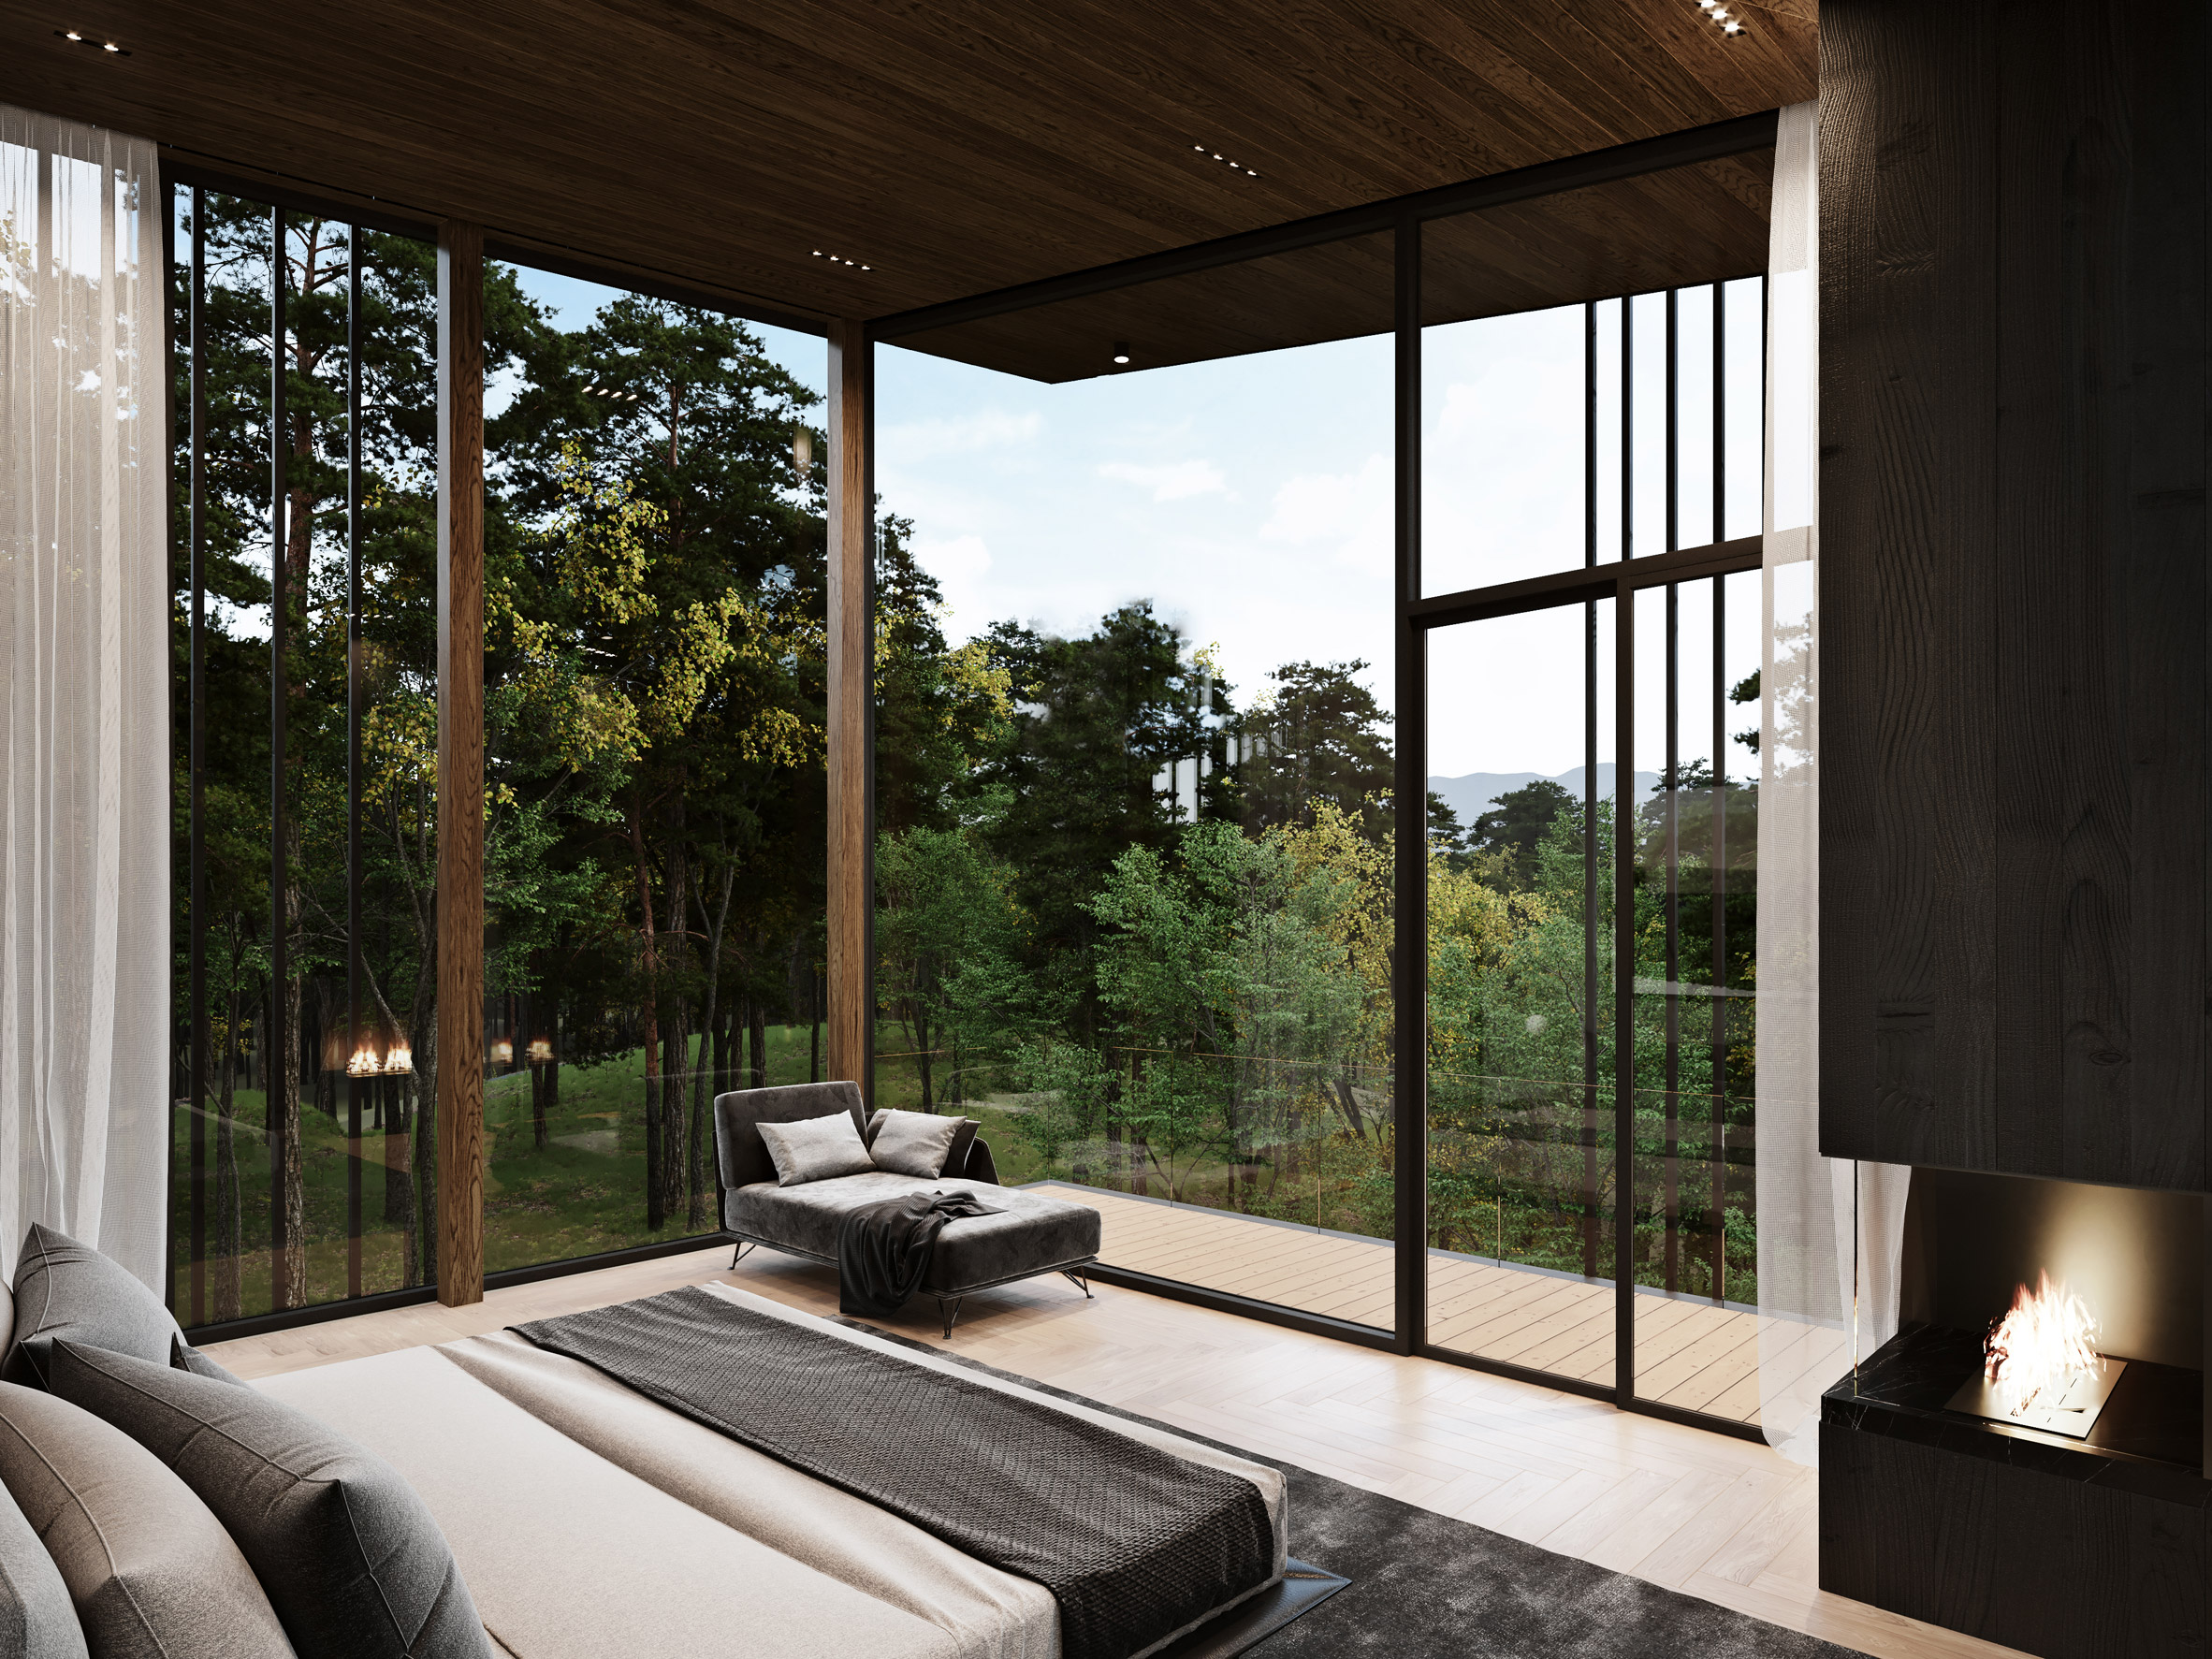 Bedrooms of Sylvan Rock house by S3 Architecture and Aston Martin